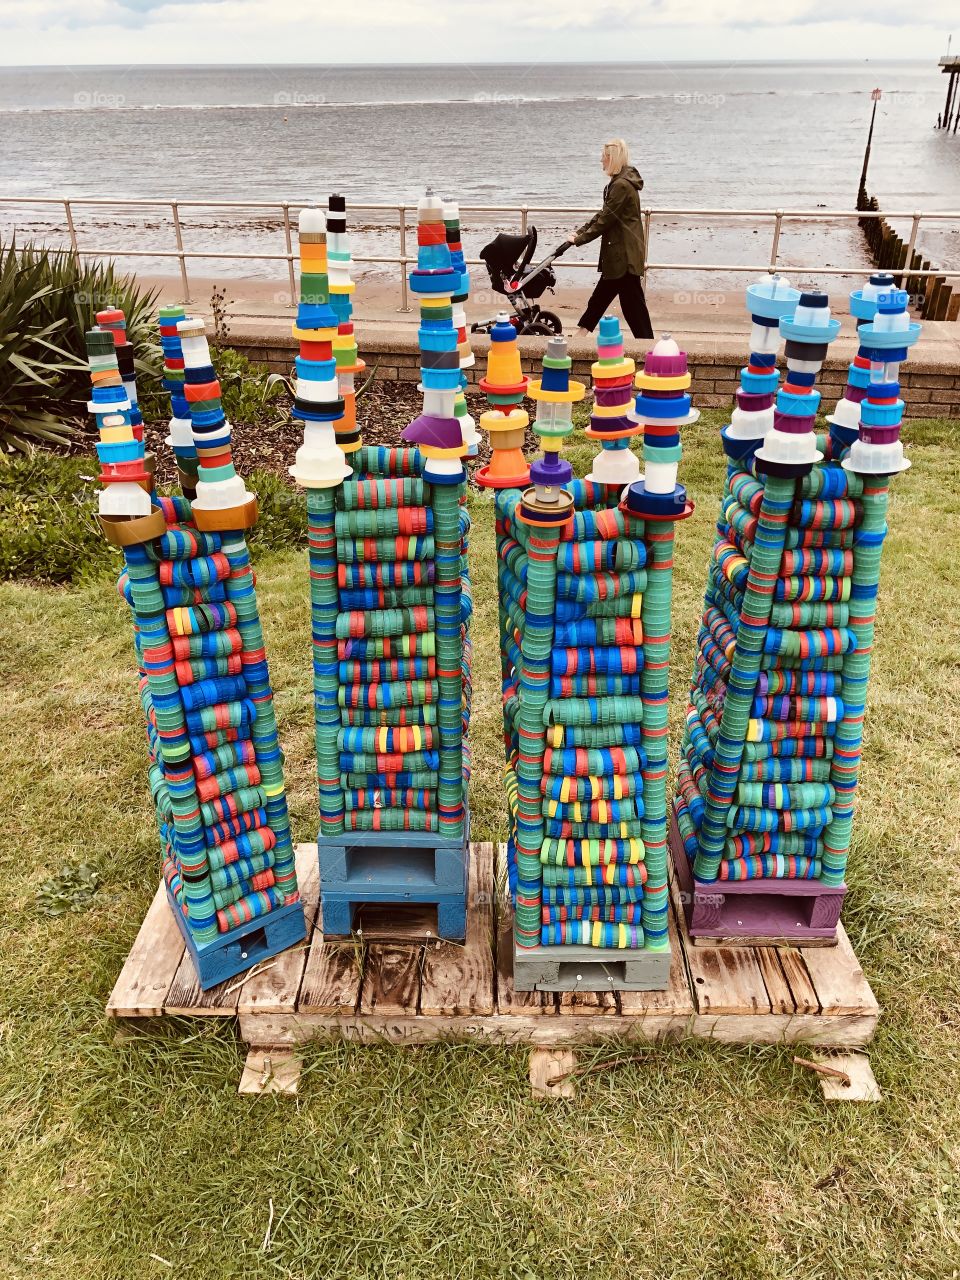 These displays which were catching a lot of attention in Teignmouth yesterday, were all made out of bottle tops, it makes for a very colourful and rather fun finish.